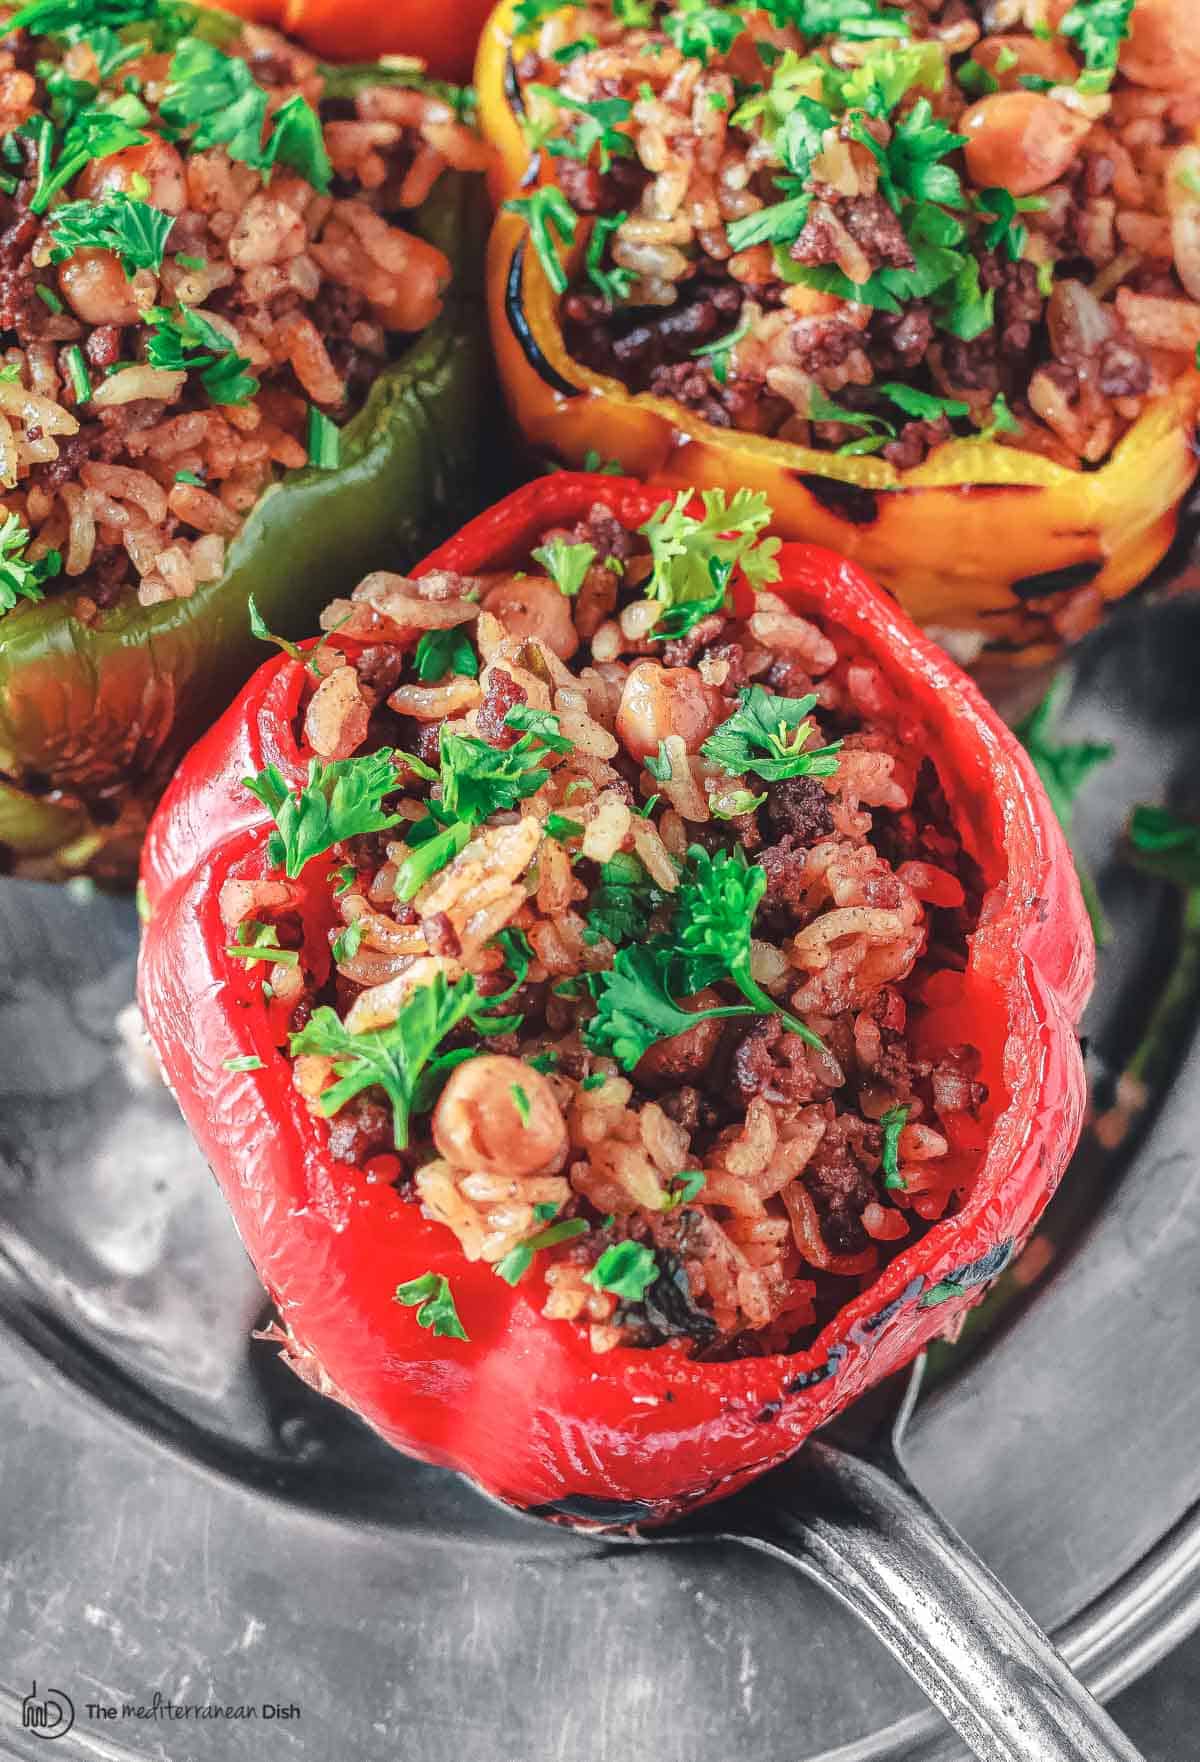 Baked stuffed bell peppers ready to serve